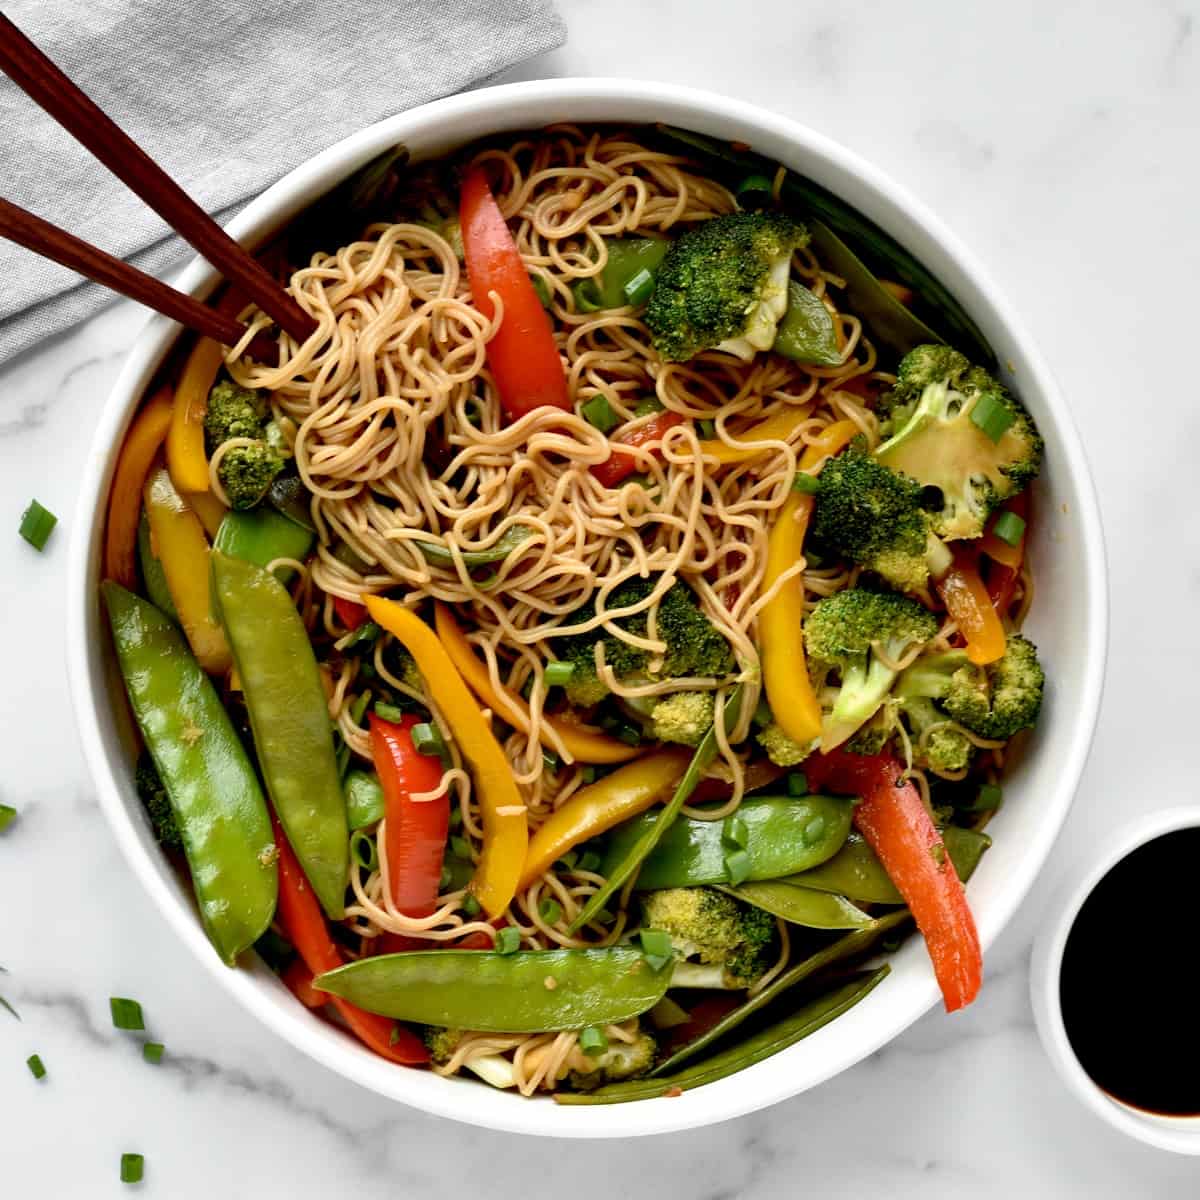 A bowl of ramen noodles with vegetables in stir fry sauce, with a side of soy sauce and two chopsticks twirled around some noodles.